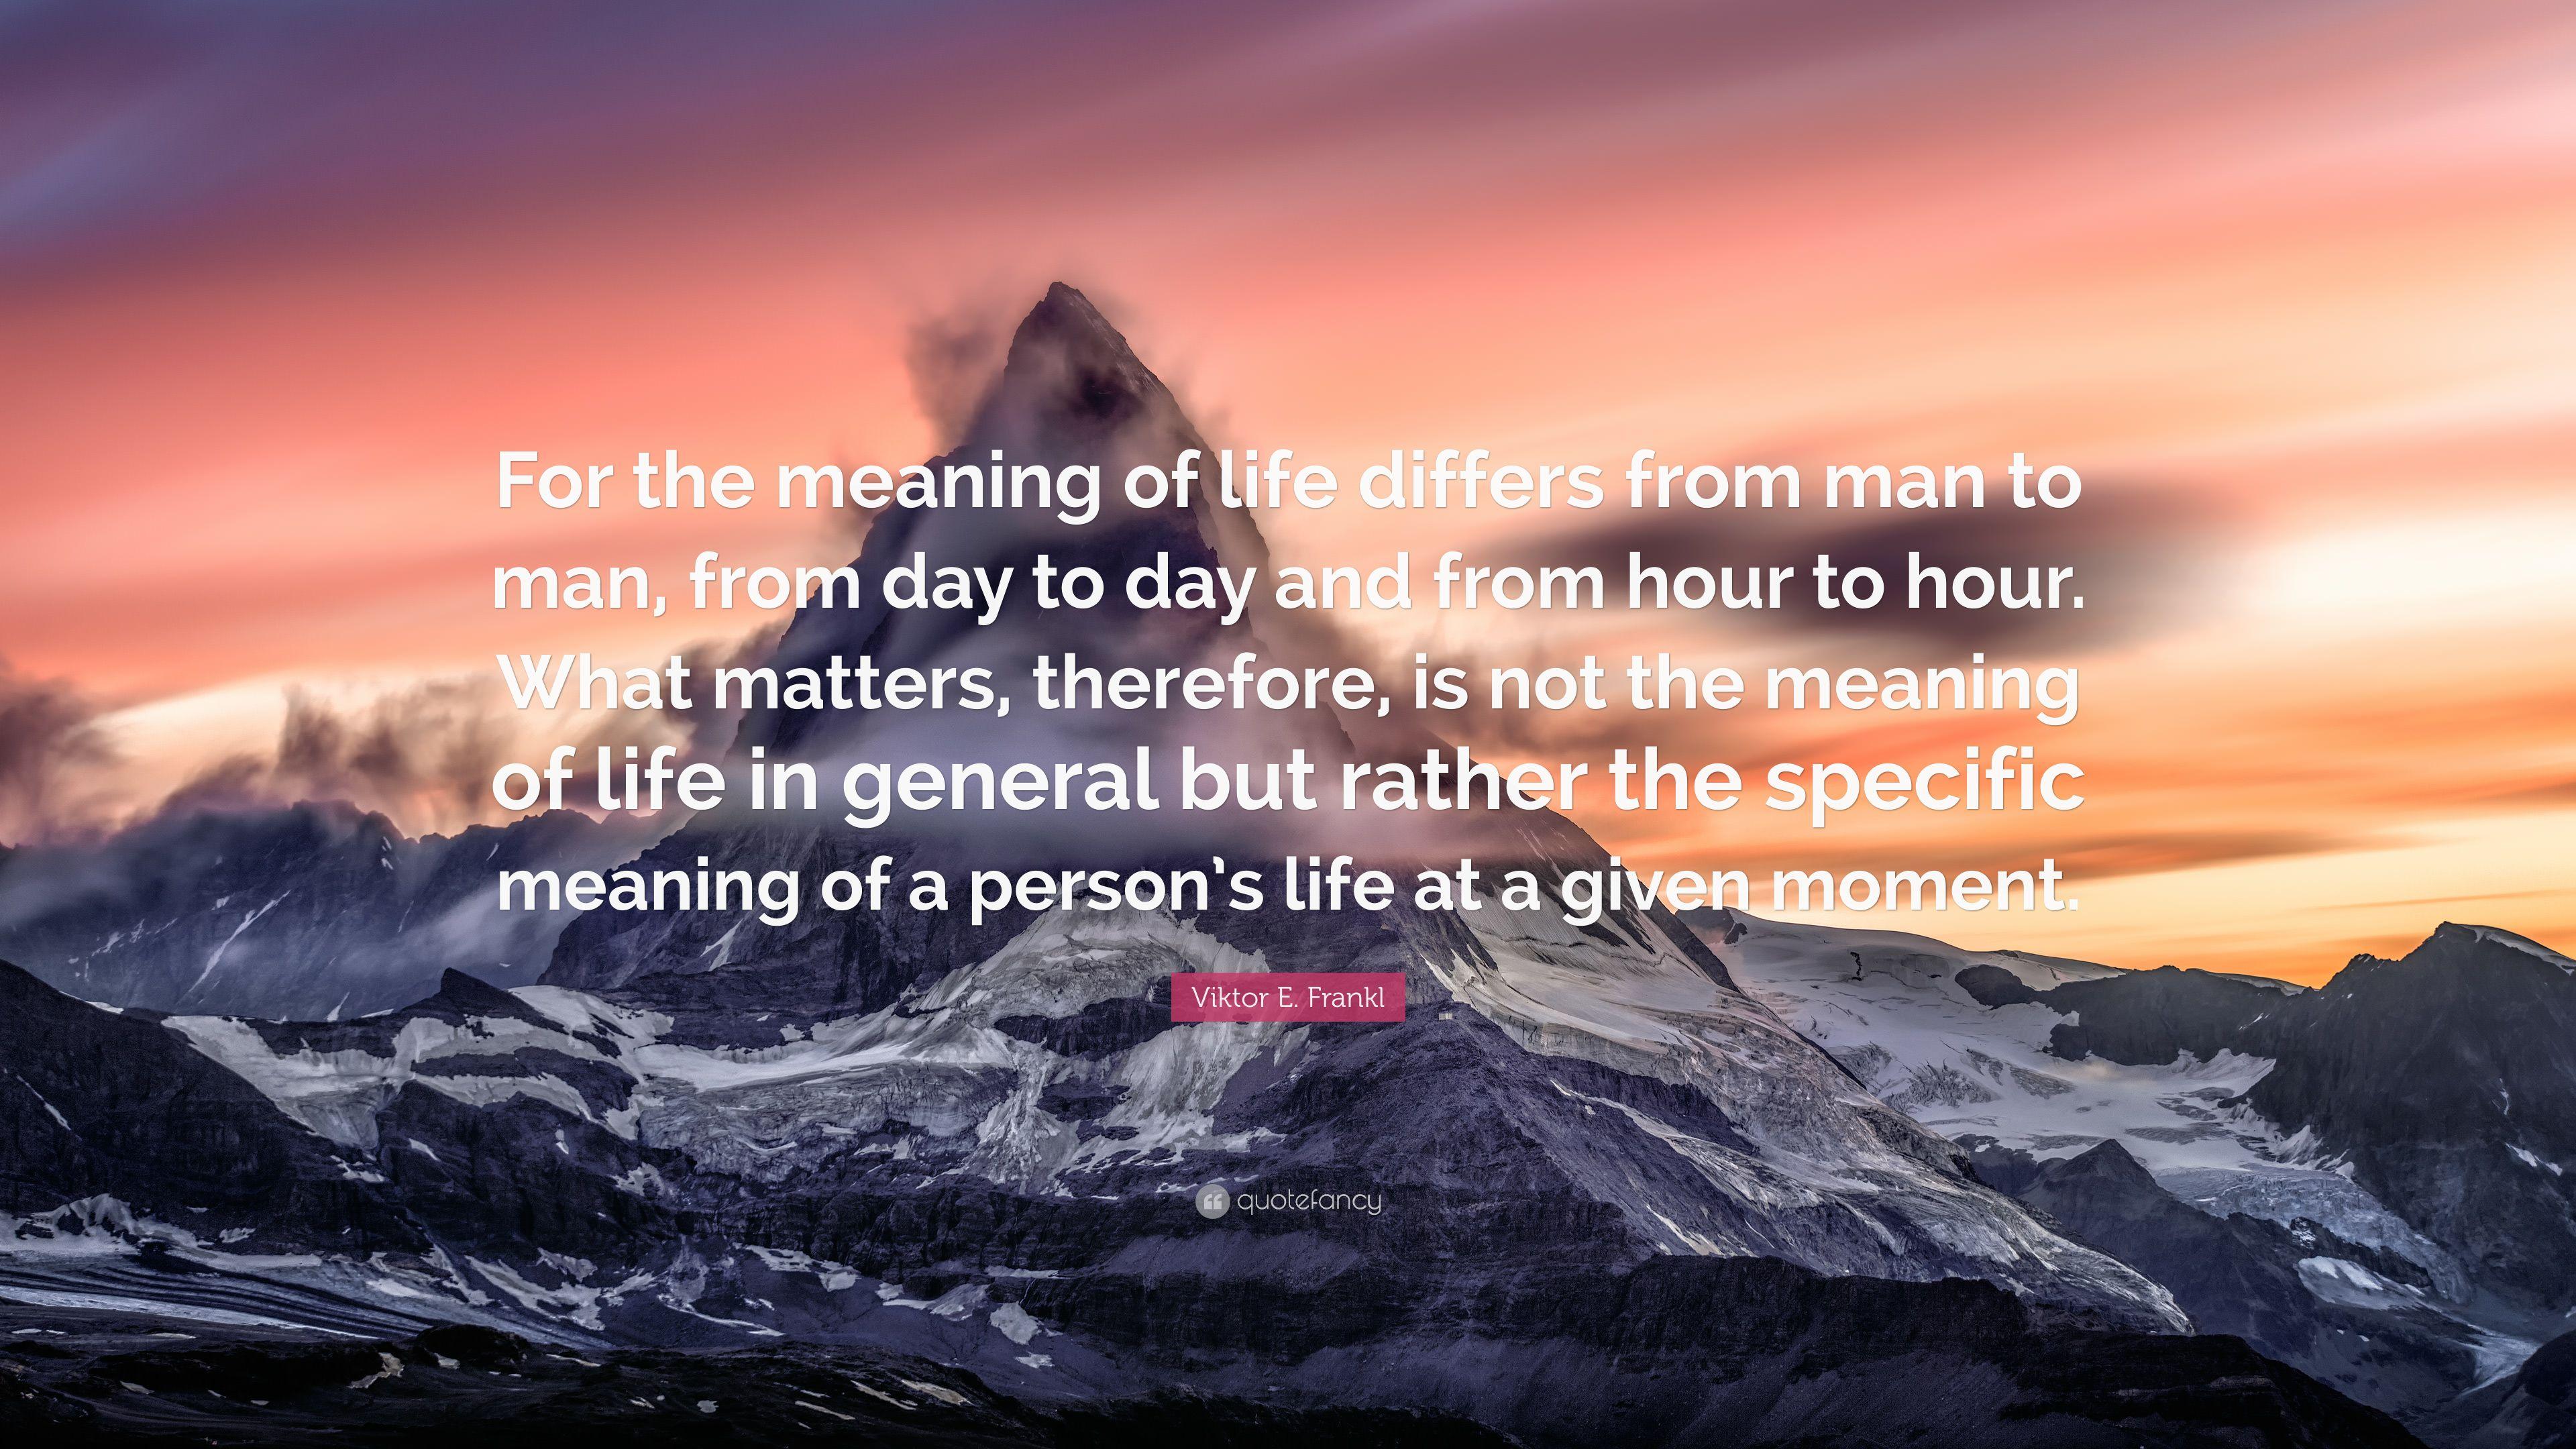 Viktor E. Frankl Quote: “For the meaning of life differs from man